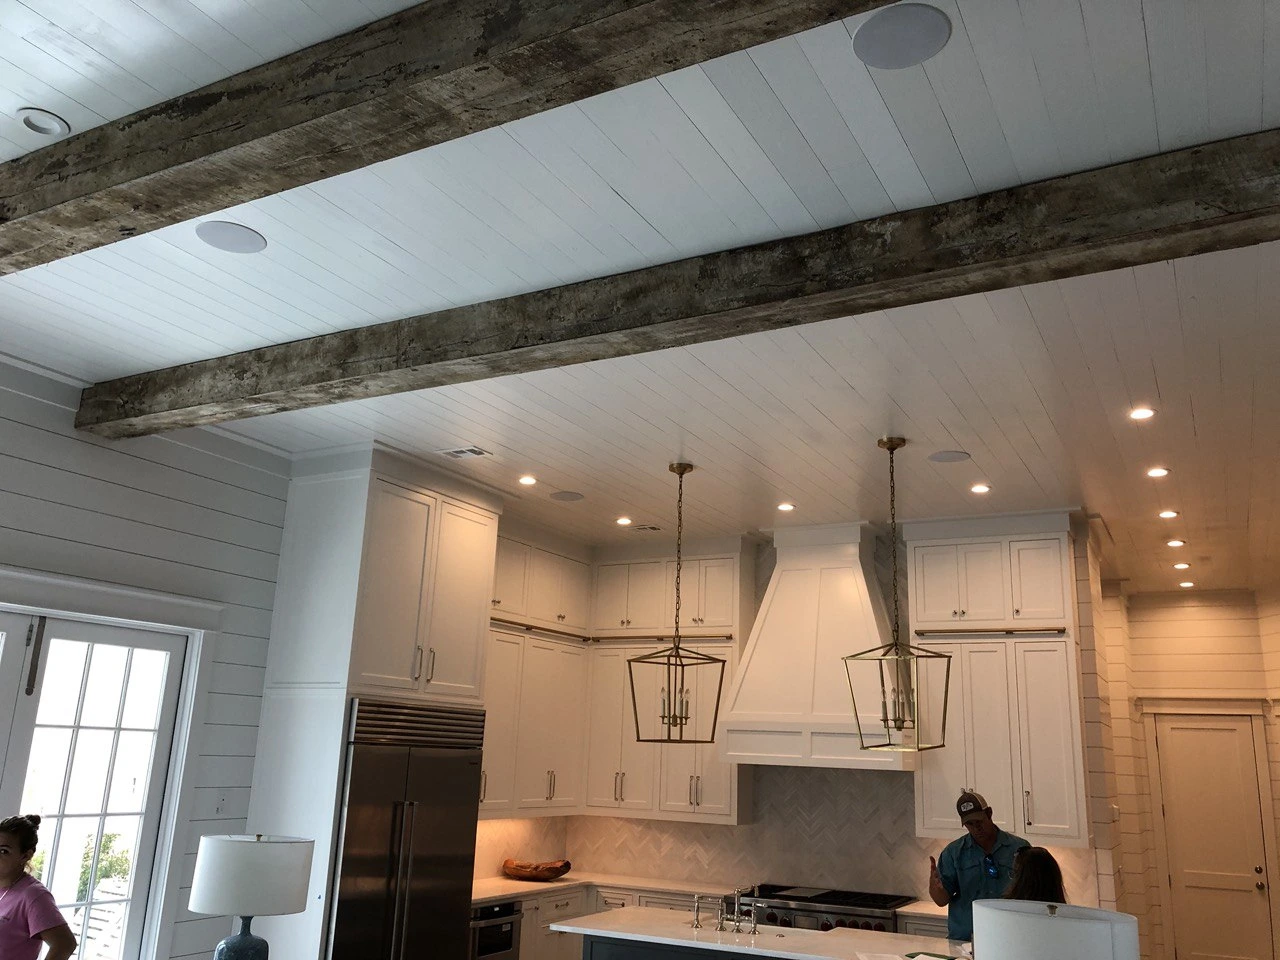 A white kitchen with wood beams in the ceiling.